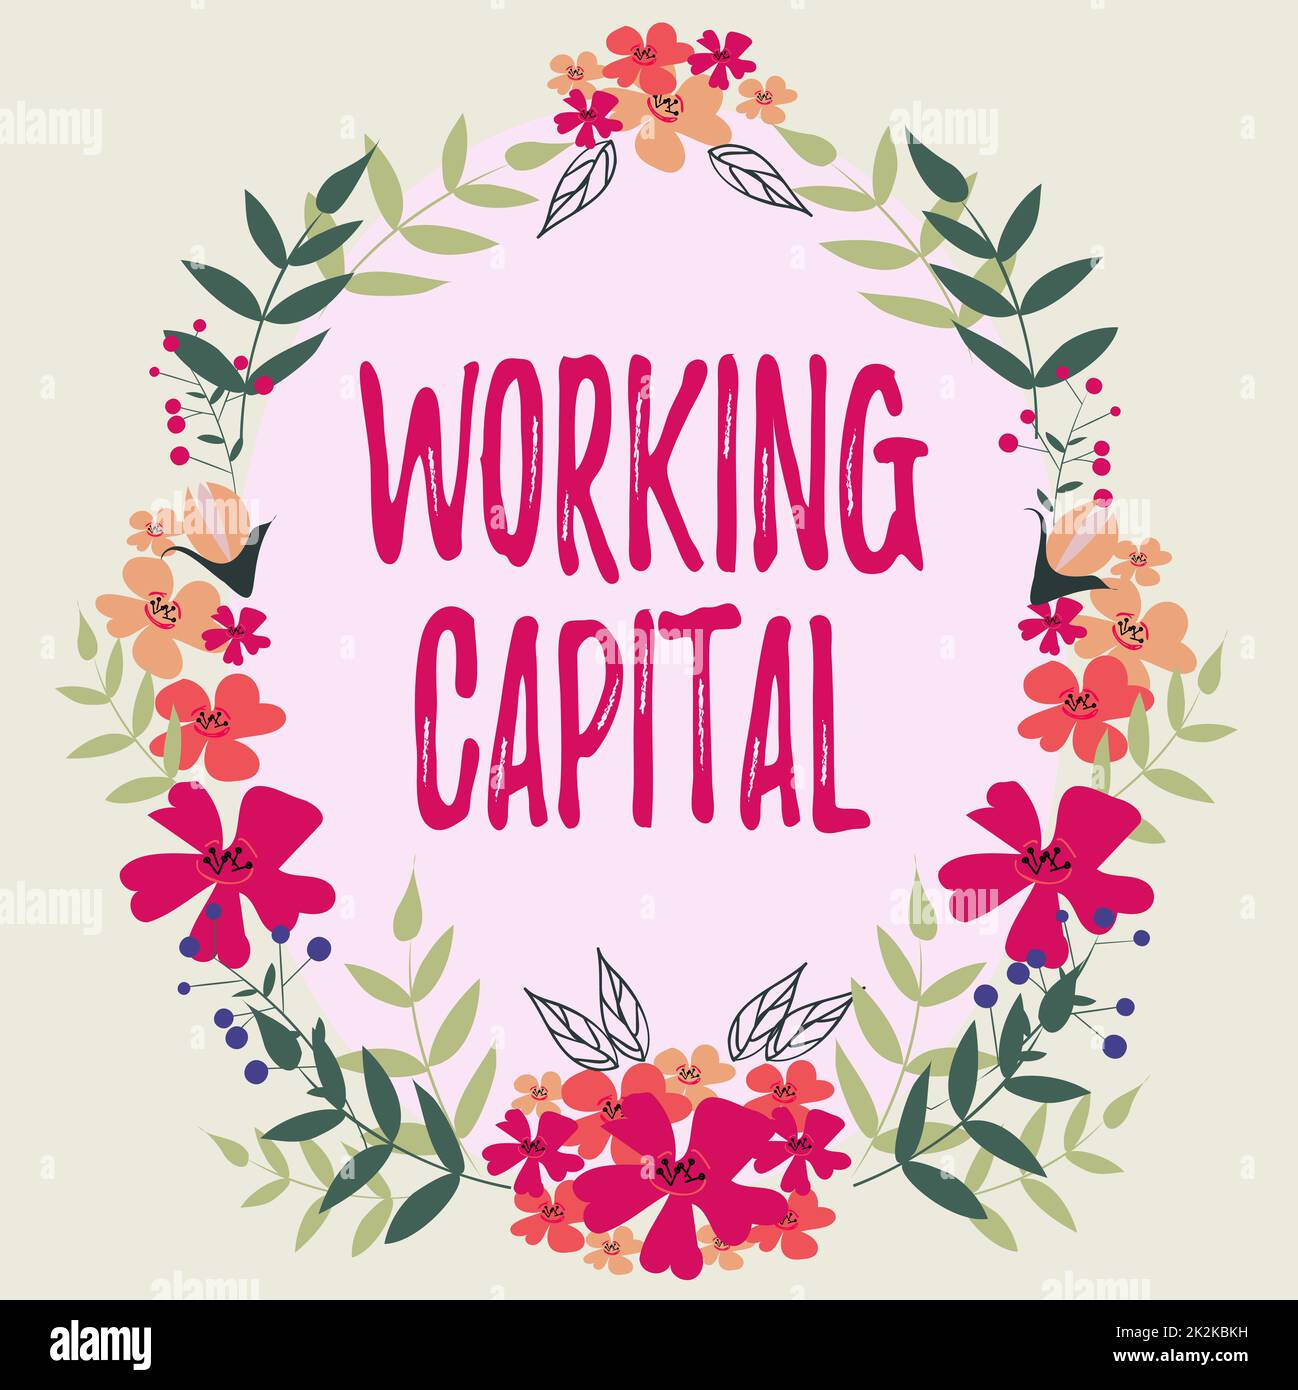 Text caption presenting Working Capital. Business showcase Working Capital Frame Decorated With Colorful Flowers And Foliage Arranged Harmoniously. Stock Photo